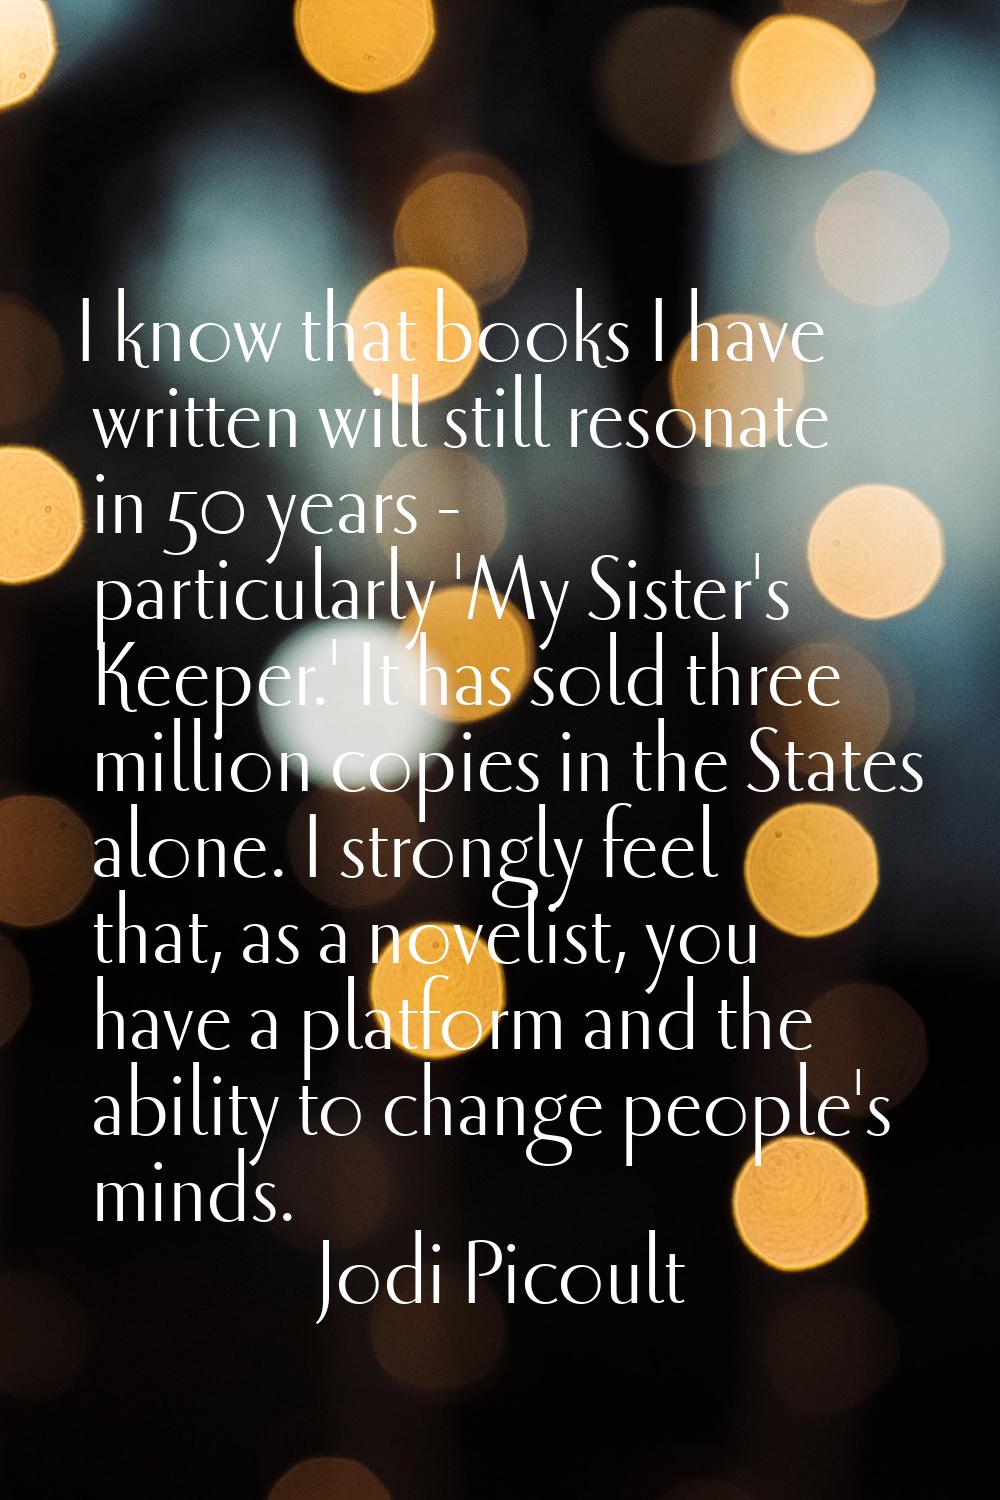 I know that books I have written will still resonate in 50 years - particularly 'My Sister's Keeper